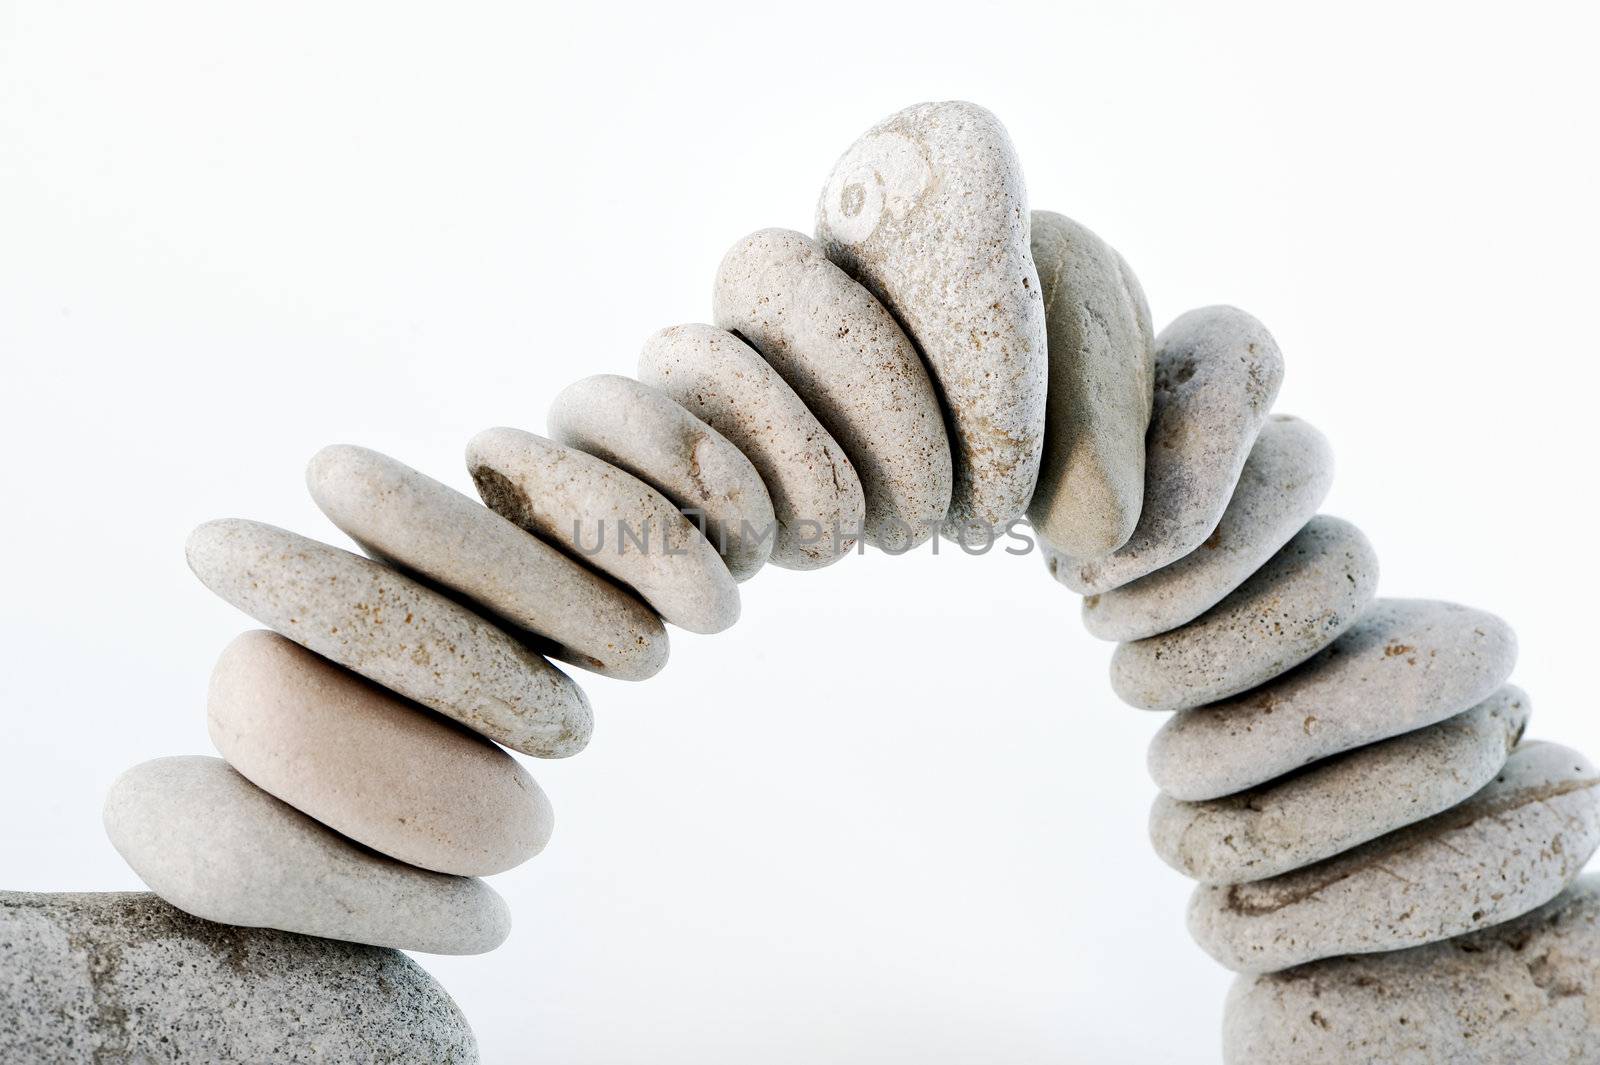 large and small white stones form an arc